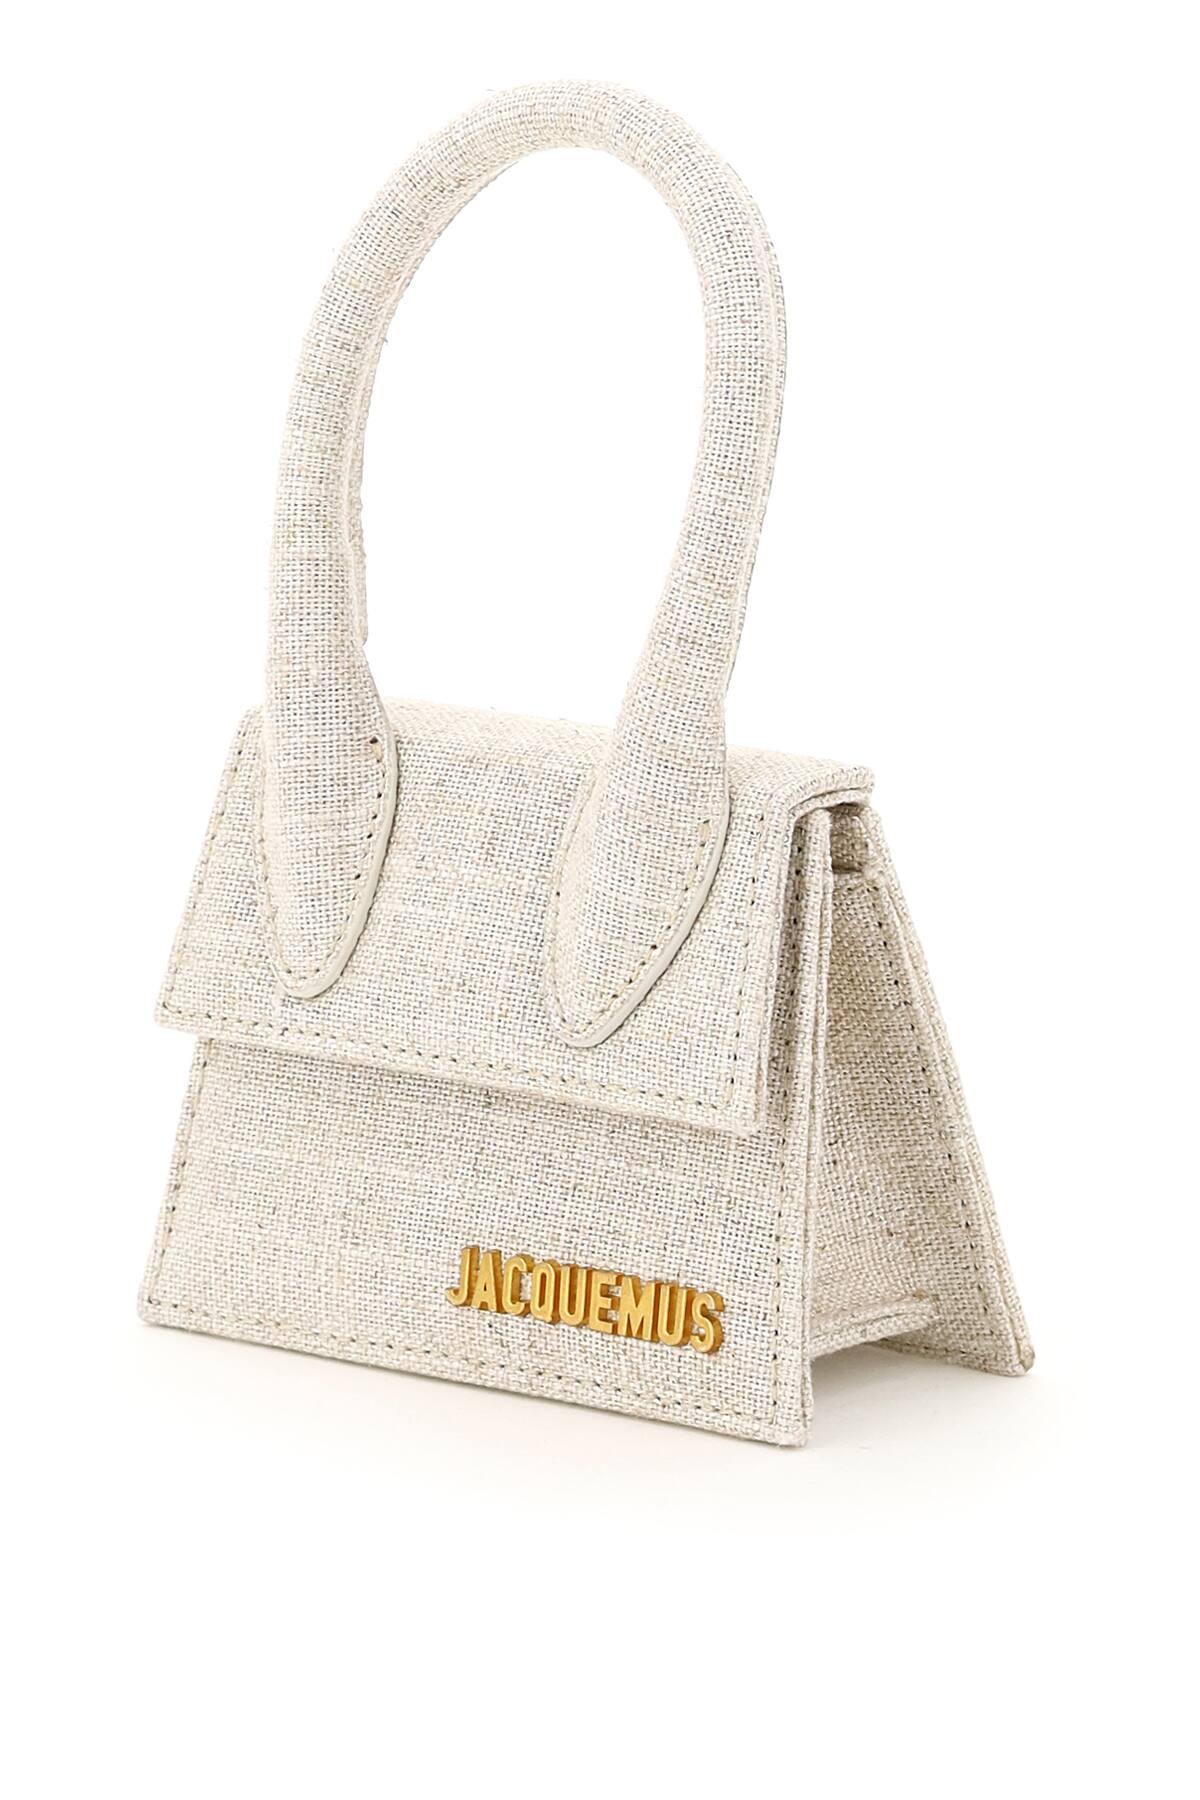 Jacquemus Le Chiquito Canvas Micro Bag in Beige (Natural) | Lyst